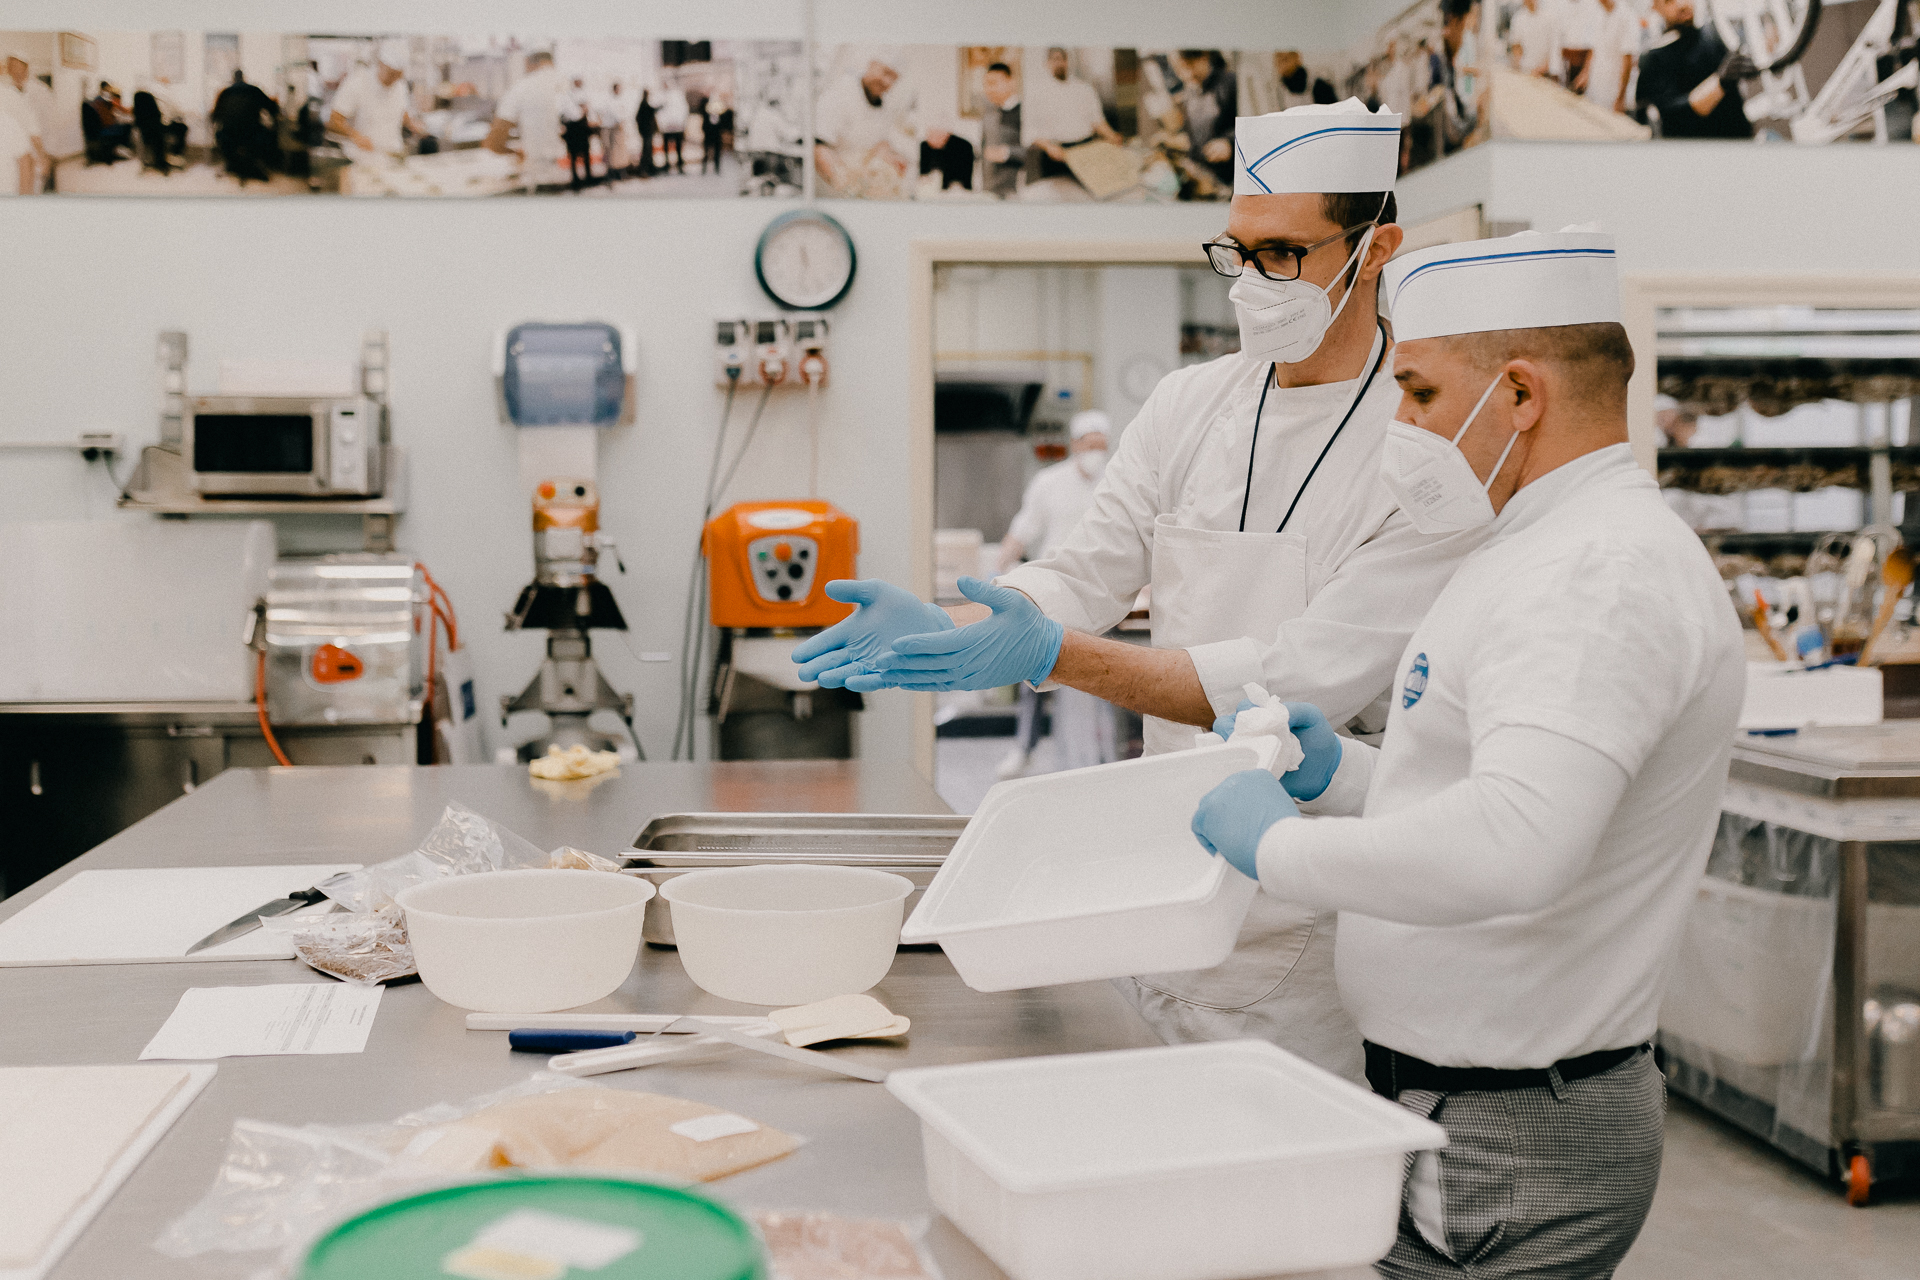 Giotto Bakery – One man talking to another, gesturing towards some plastic bowls on a work table as the other holds a plastic tray.